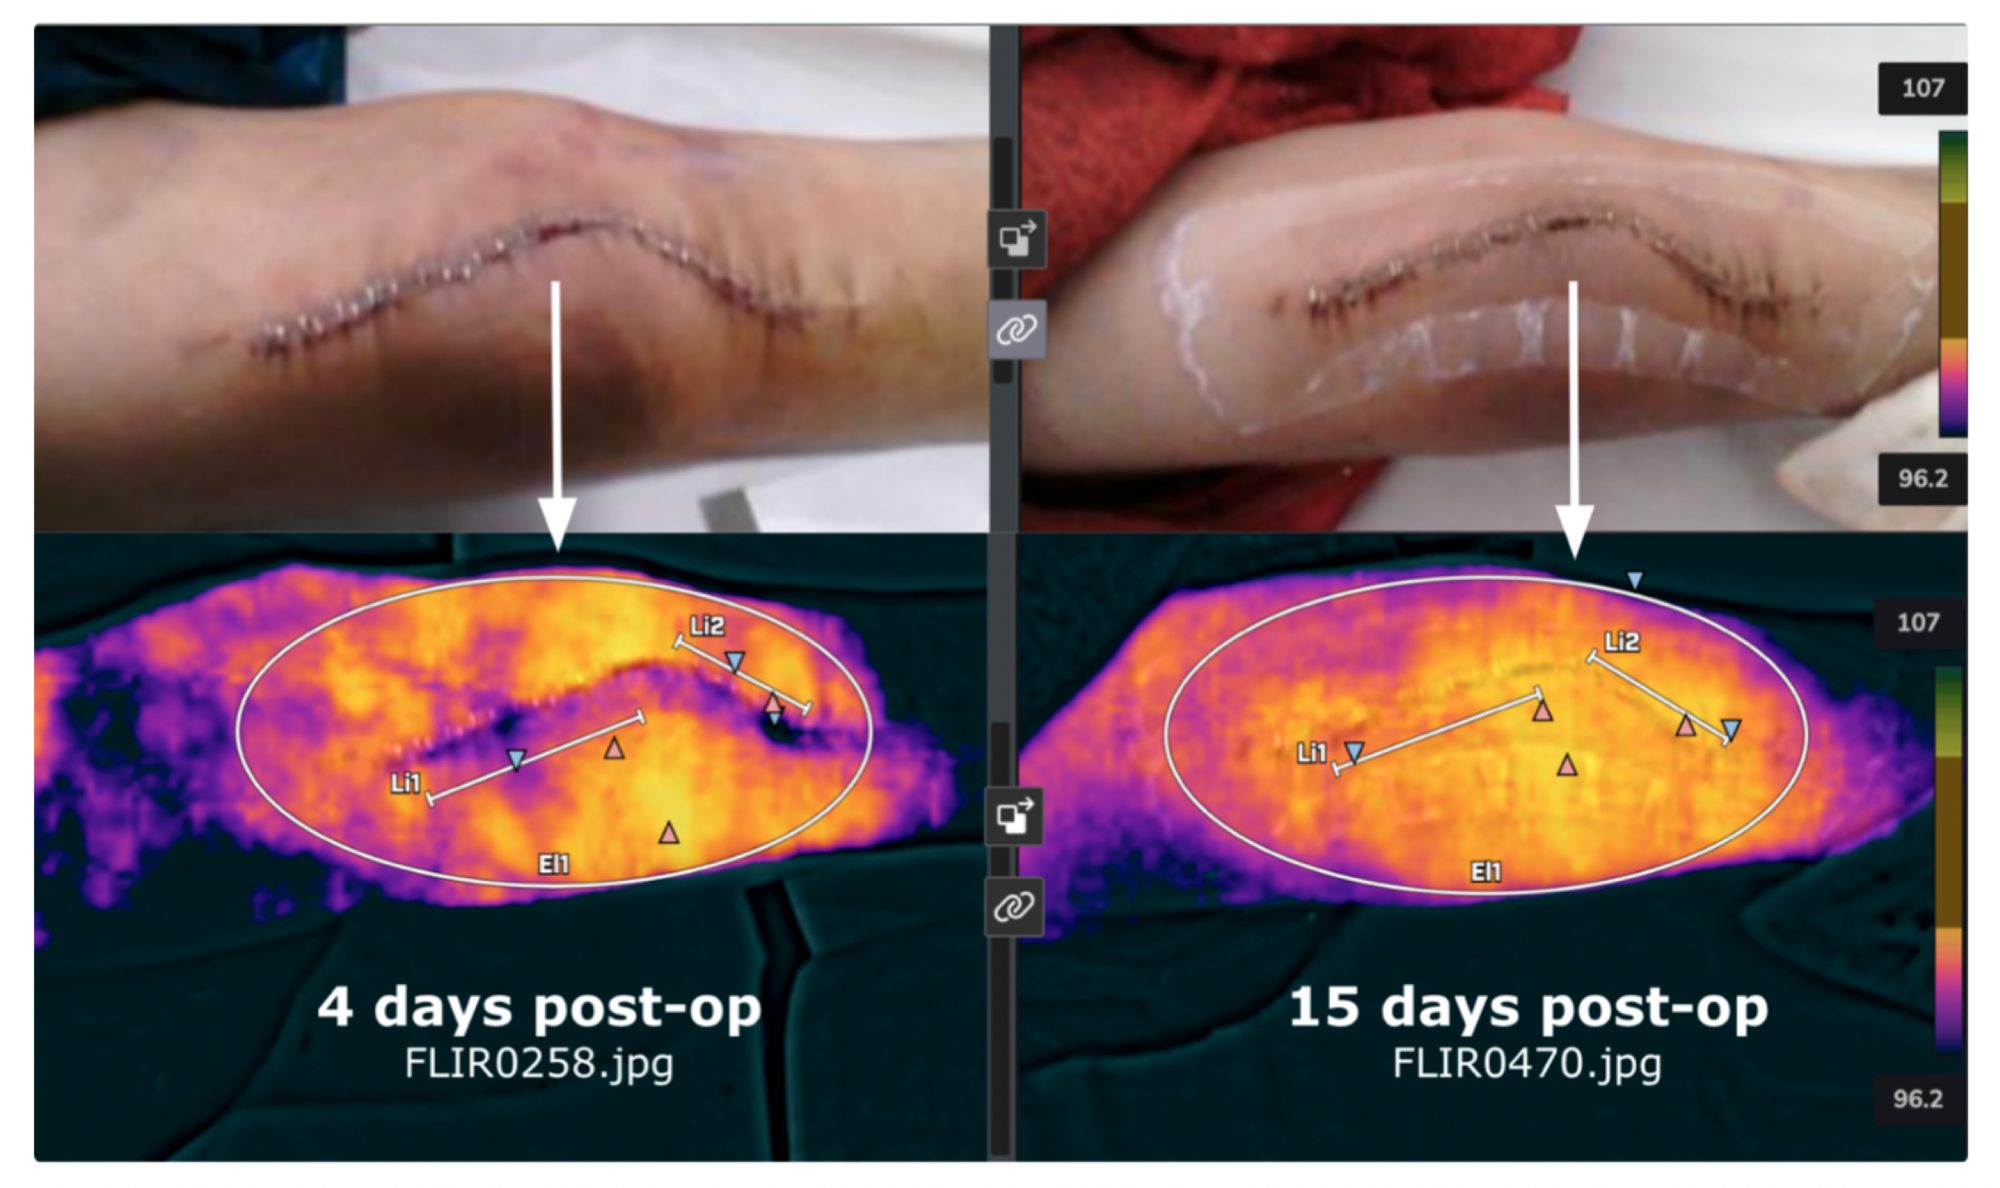 Figure 5: Truss Medical is exploring how thermal scans can diagnosis proper wound healing, infection, and/or inflammation surrounding an implant. This particular example is using thermal scans to determine if infection or inflammation (which would raise temperatures) is occurring surrounding a patient’s knee implant. Further, AI is being incorporated into such thermal data to predict the chances of infection and/or inflammation surrounding medical device surgery